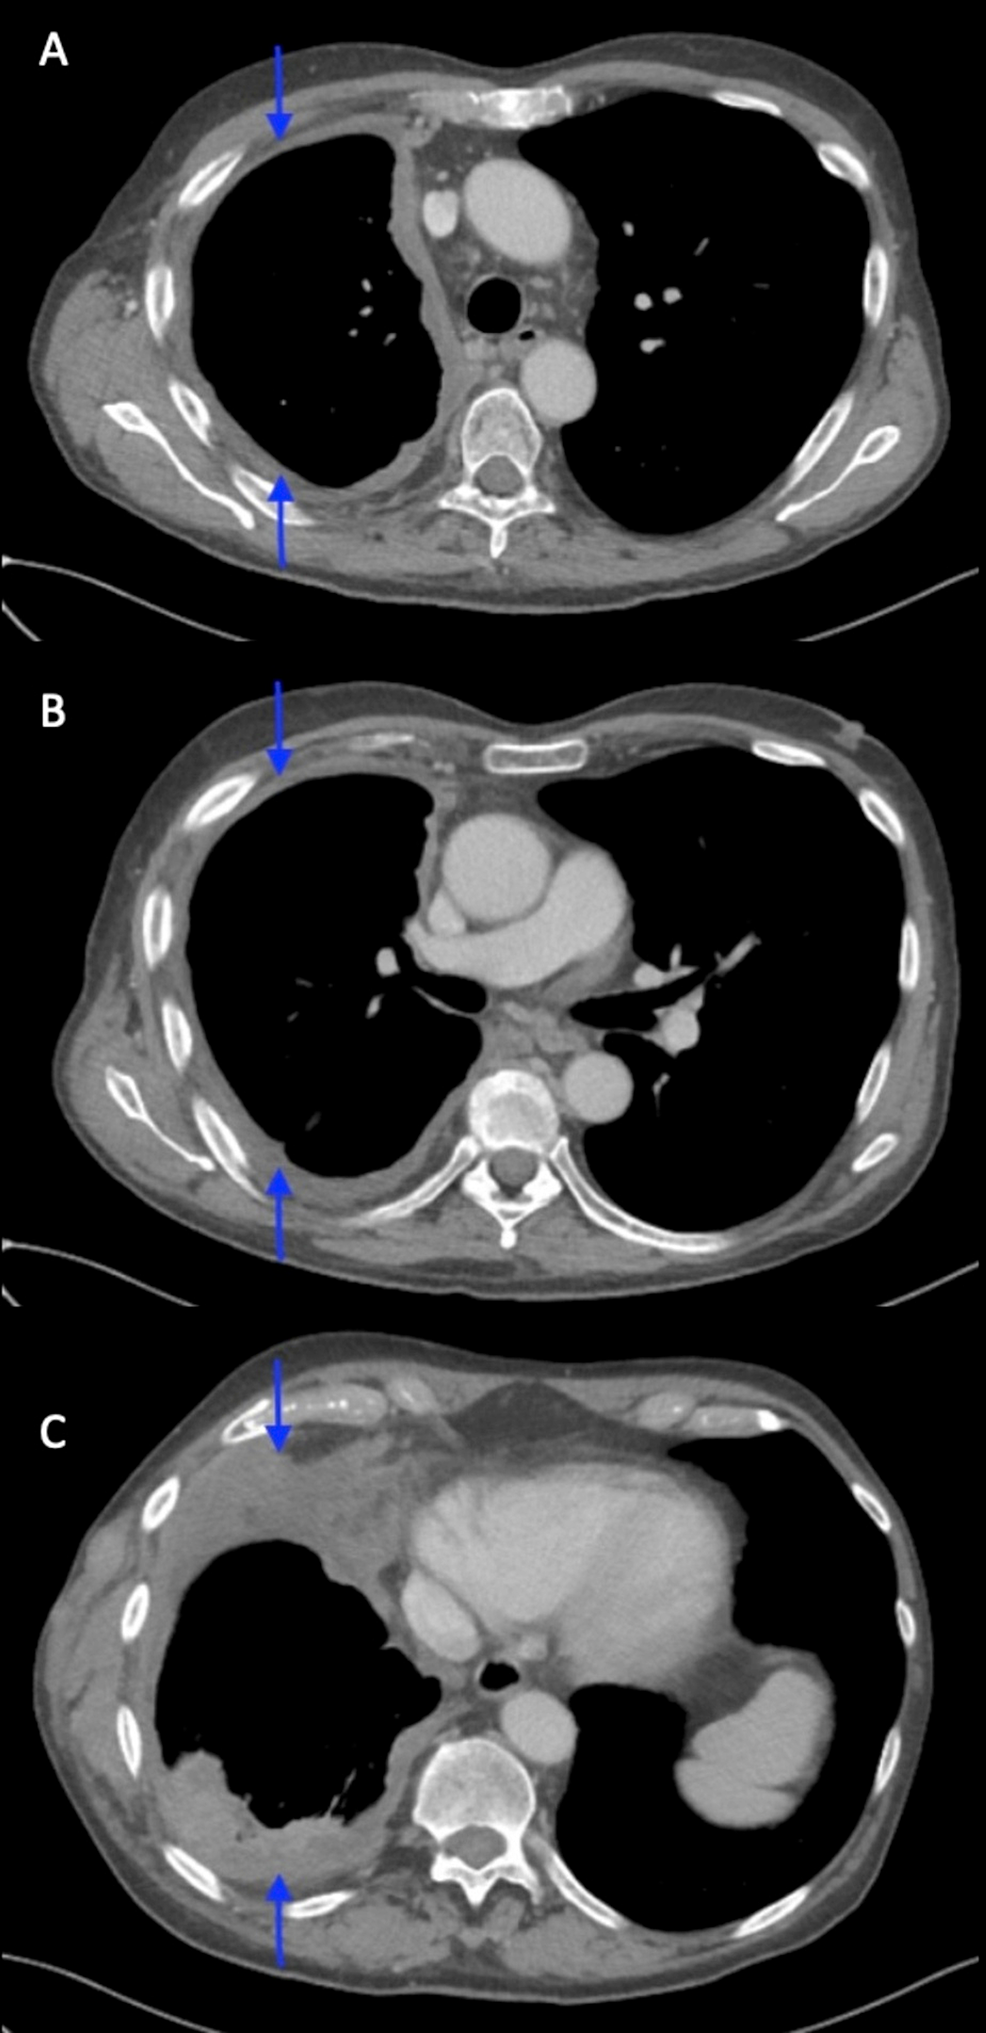 CT-Chest-5-months-after-completion-of-RT,-after-12-cycles-of-pembrolizumab.-Approximated-aerated-right-lung-is-90%.-A)-Right-pleural-based-confluent-mass-has-substantially-improved-to-12x1mm-along-the-lateral-superior-mediastinum.-B)-Compression-of-right-mainstem-bronchus-resolved.-C)-Lateral-chest-wall-mass-decreased-to-23x80mm.-Reduction-in-extent-of-tumor-mass.-